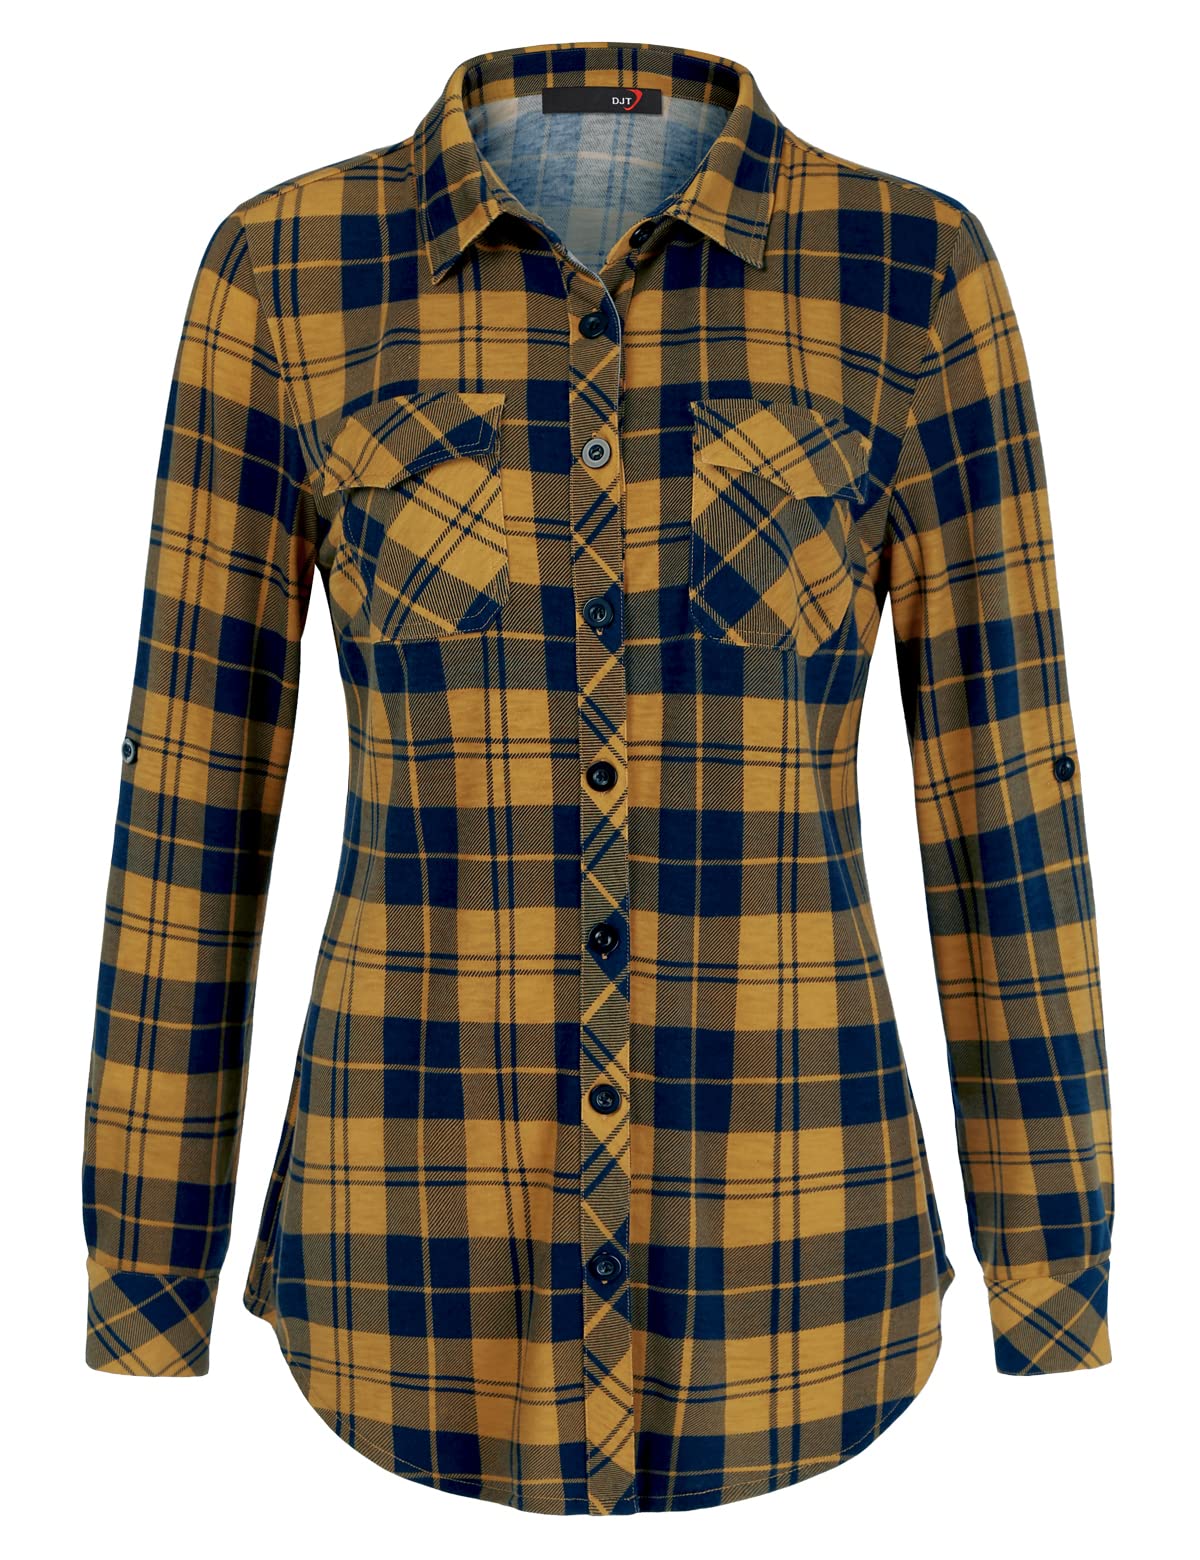 DJT Roll Up Long Sleeve Yellow Navy Plaid Women’s Collared Button Down Plaid Shirt